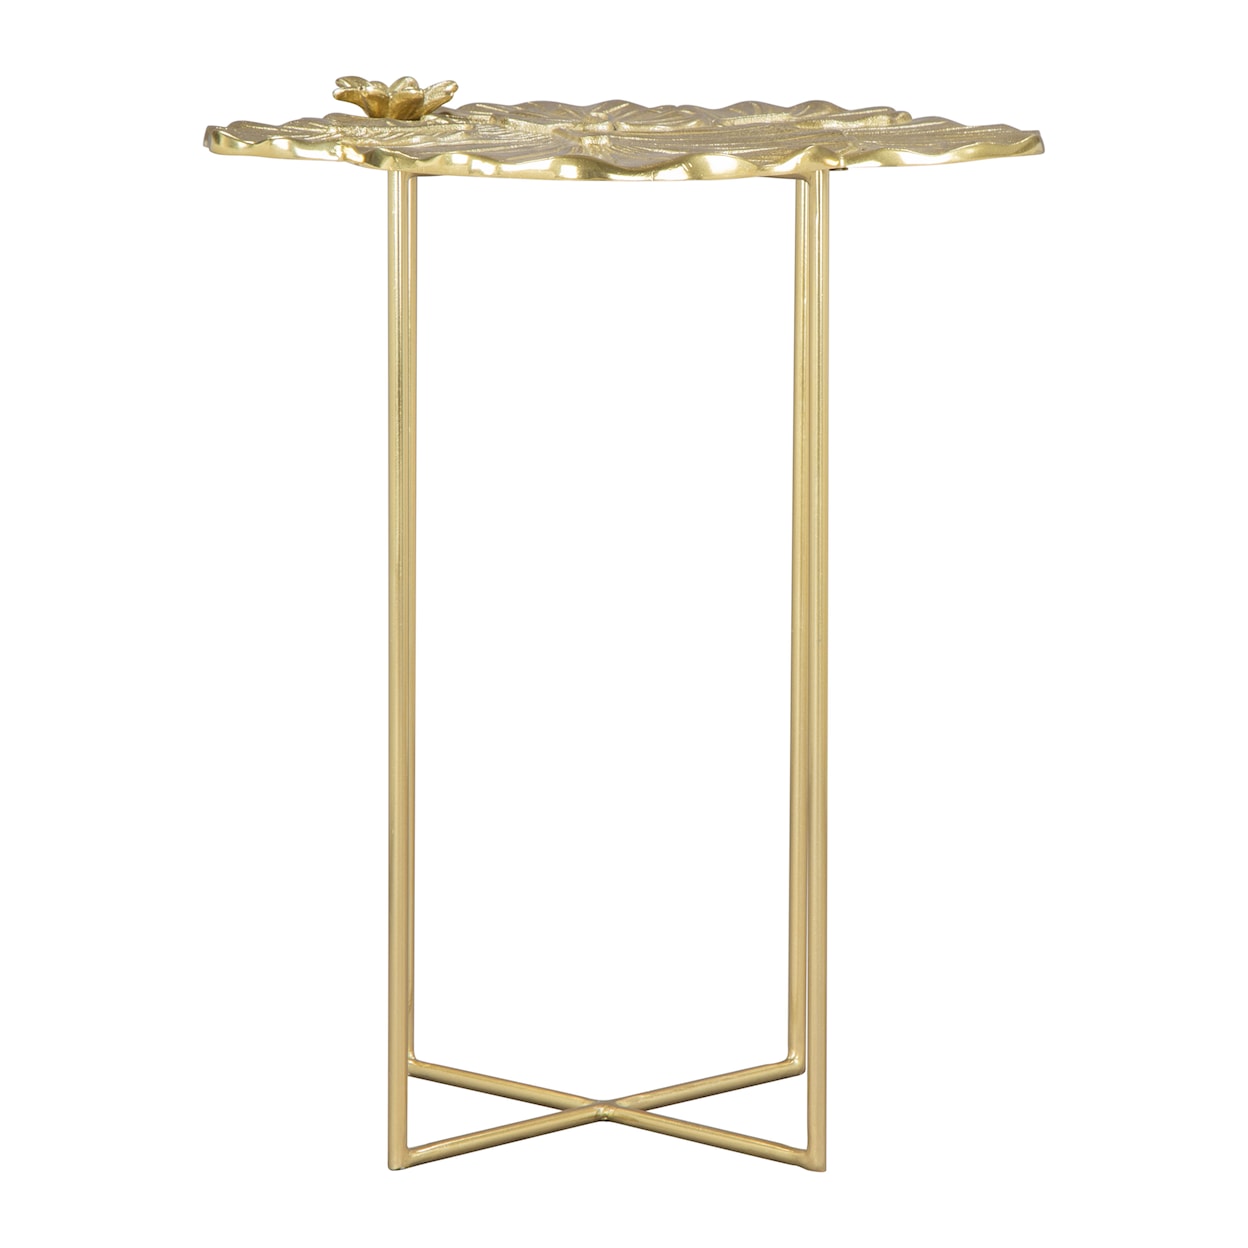 Zuo Lotus Side Table